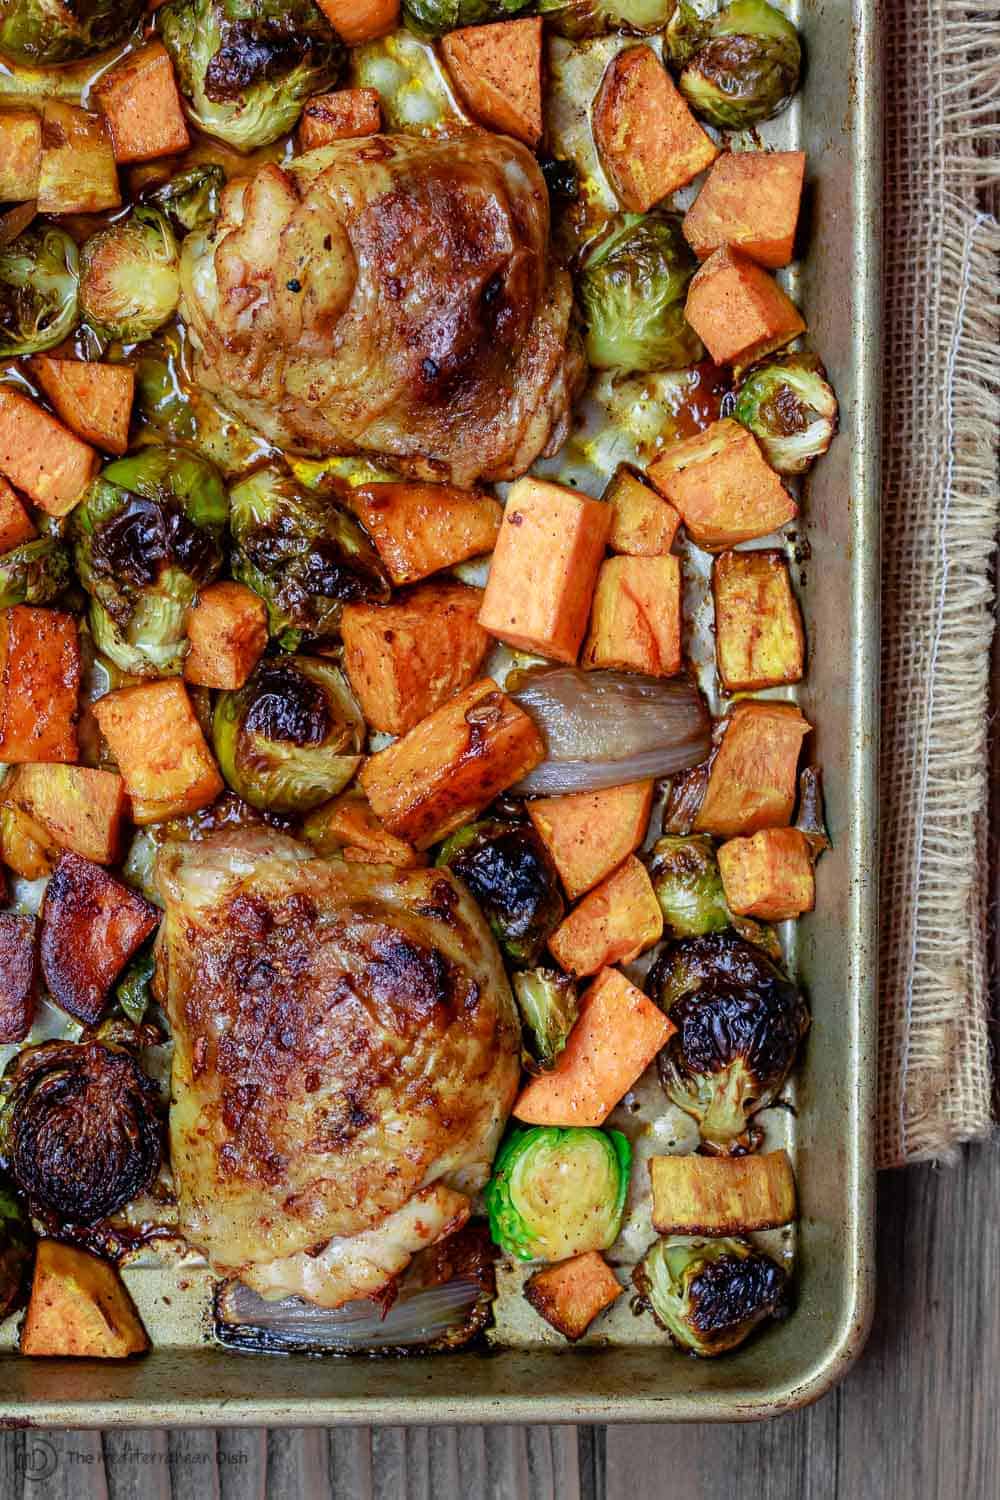 Chicken and Vegetables on a sheet pan after being baked